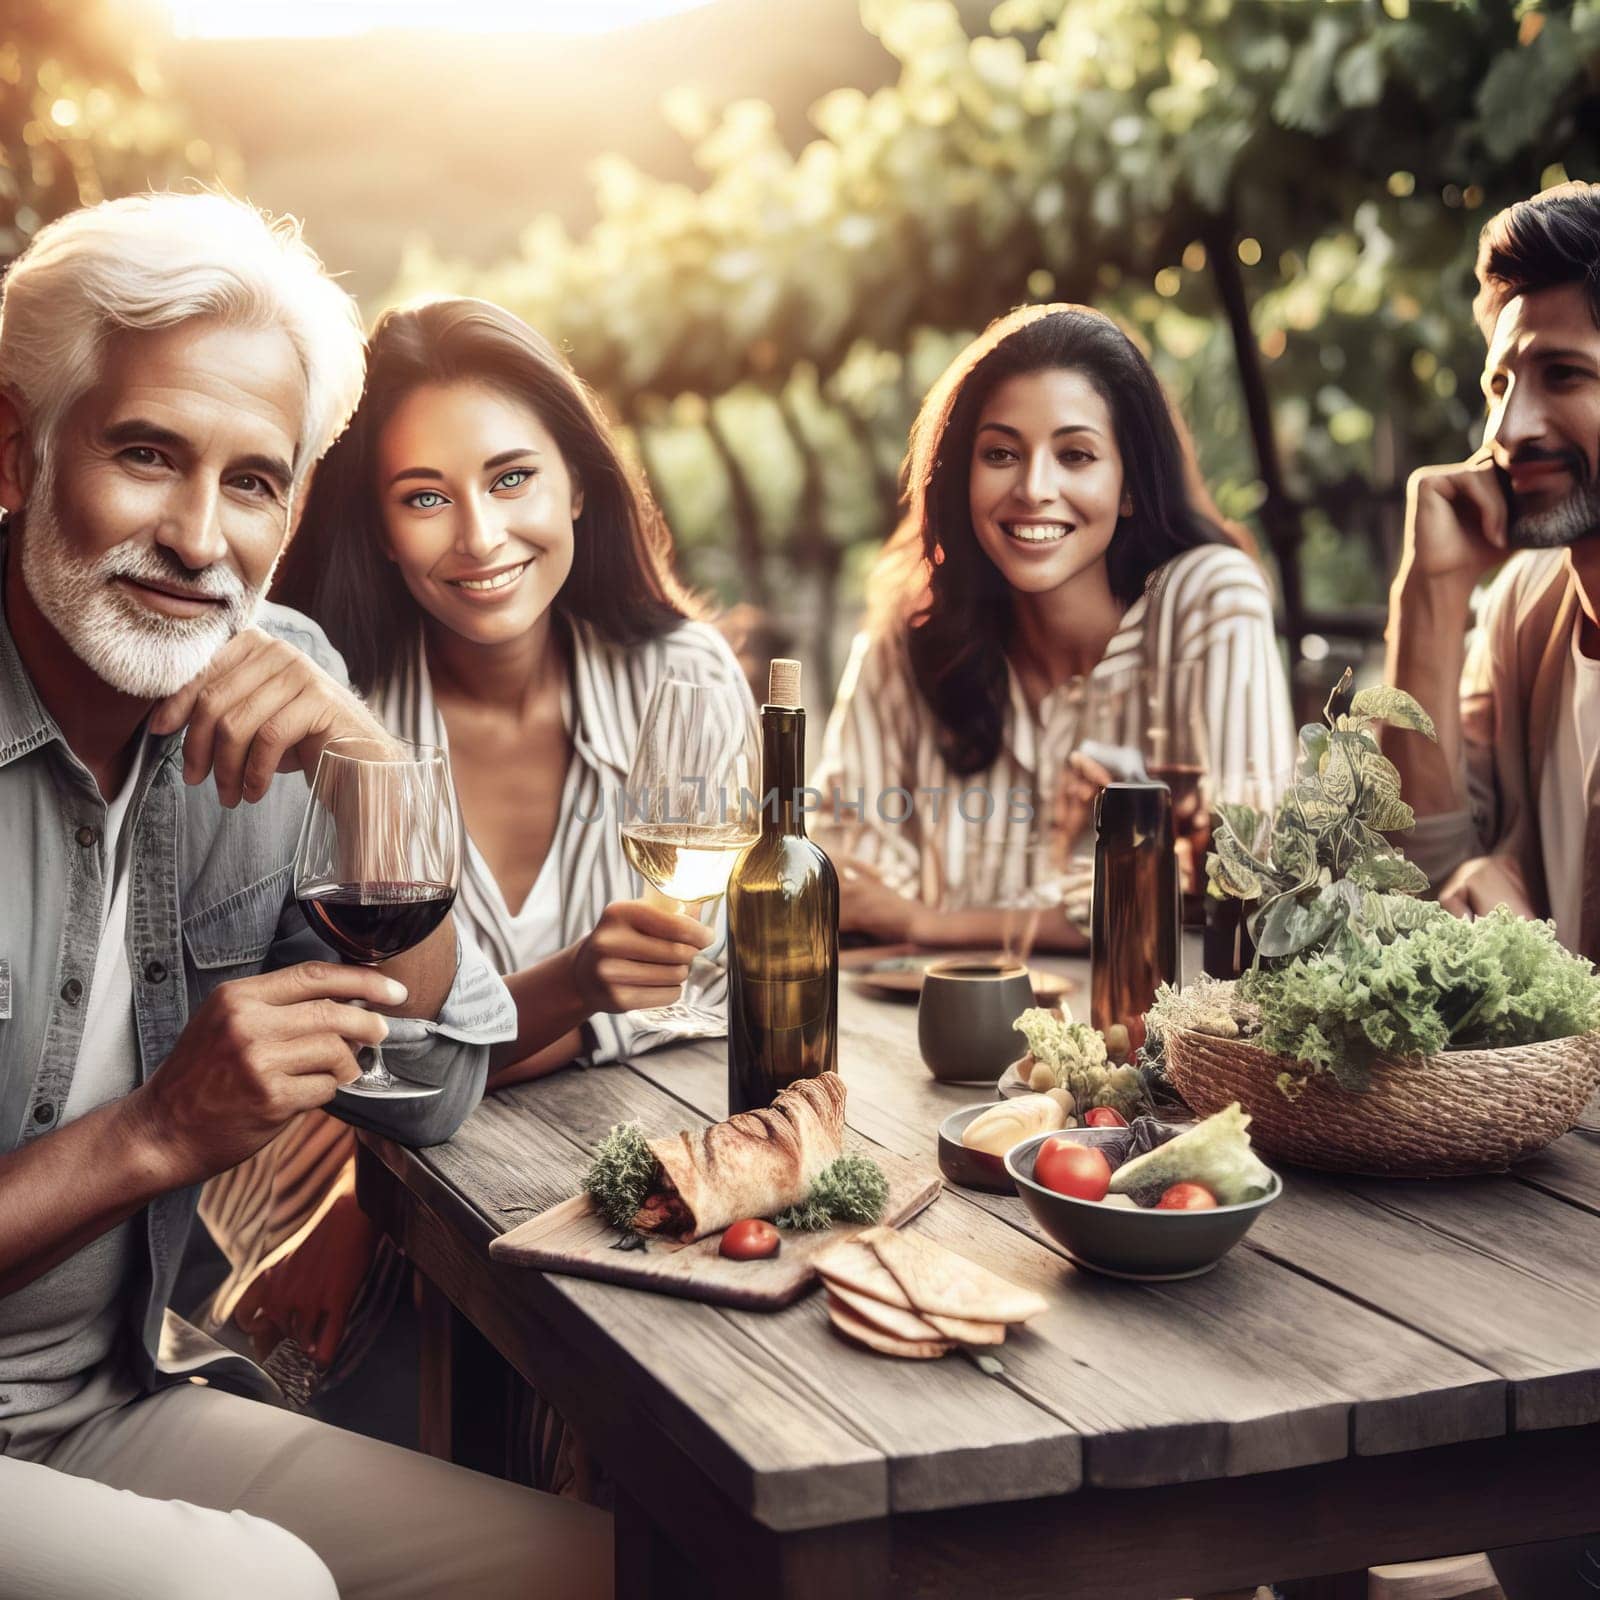 Friends enjoying a summer garden party with wine and food on a rustic wooden table. by sfinks